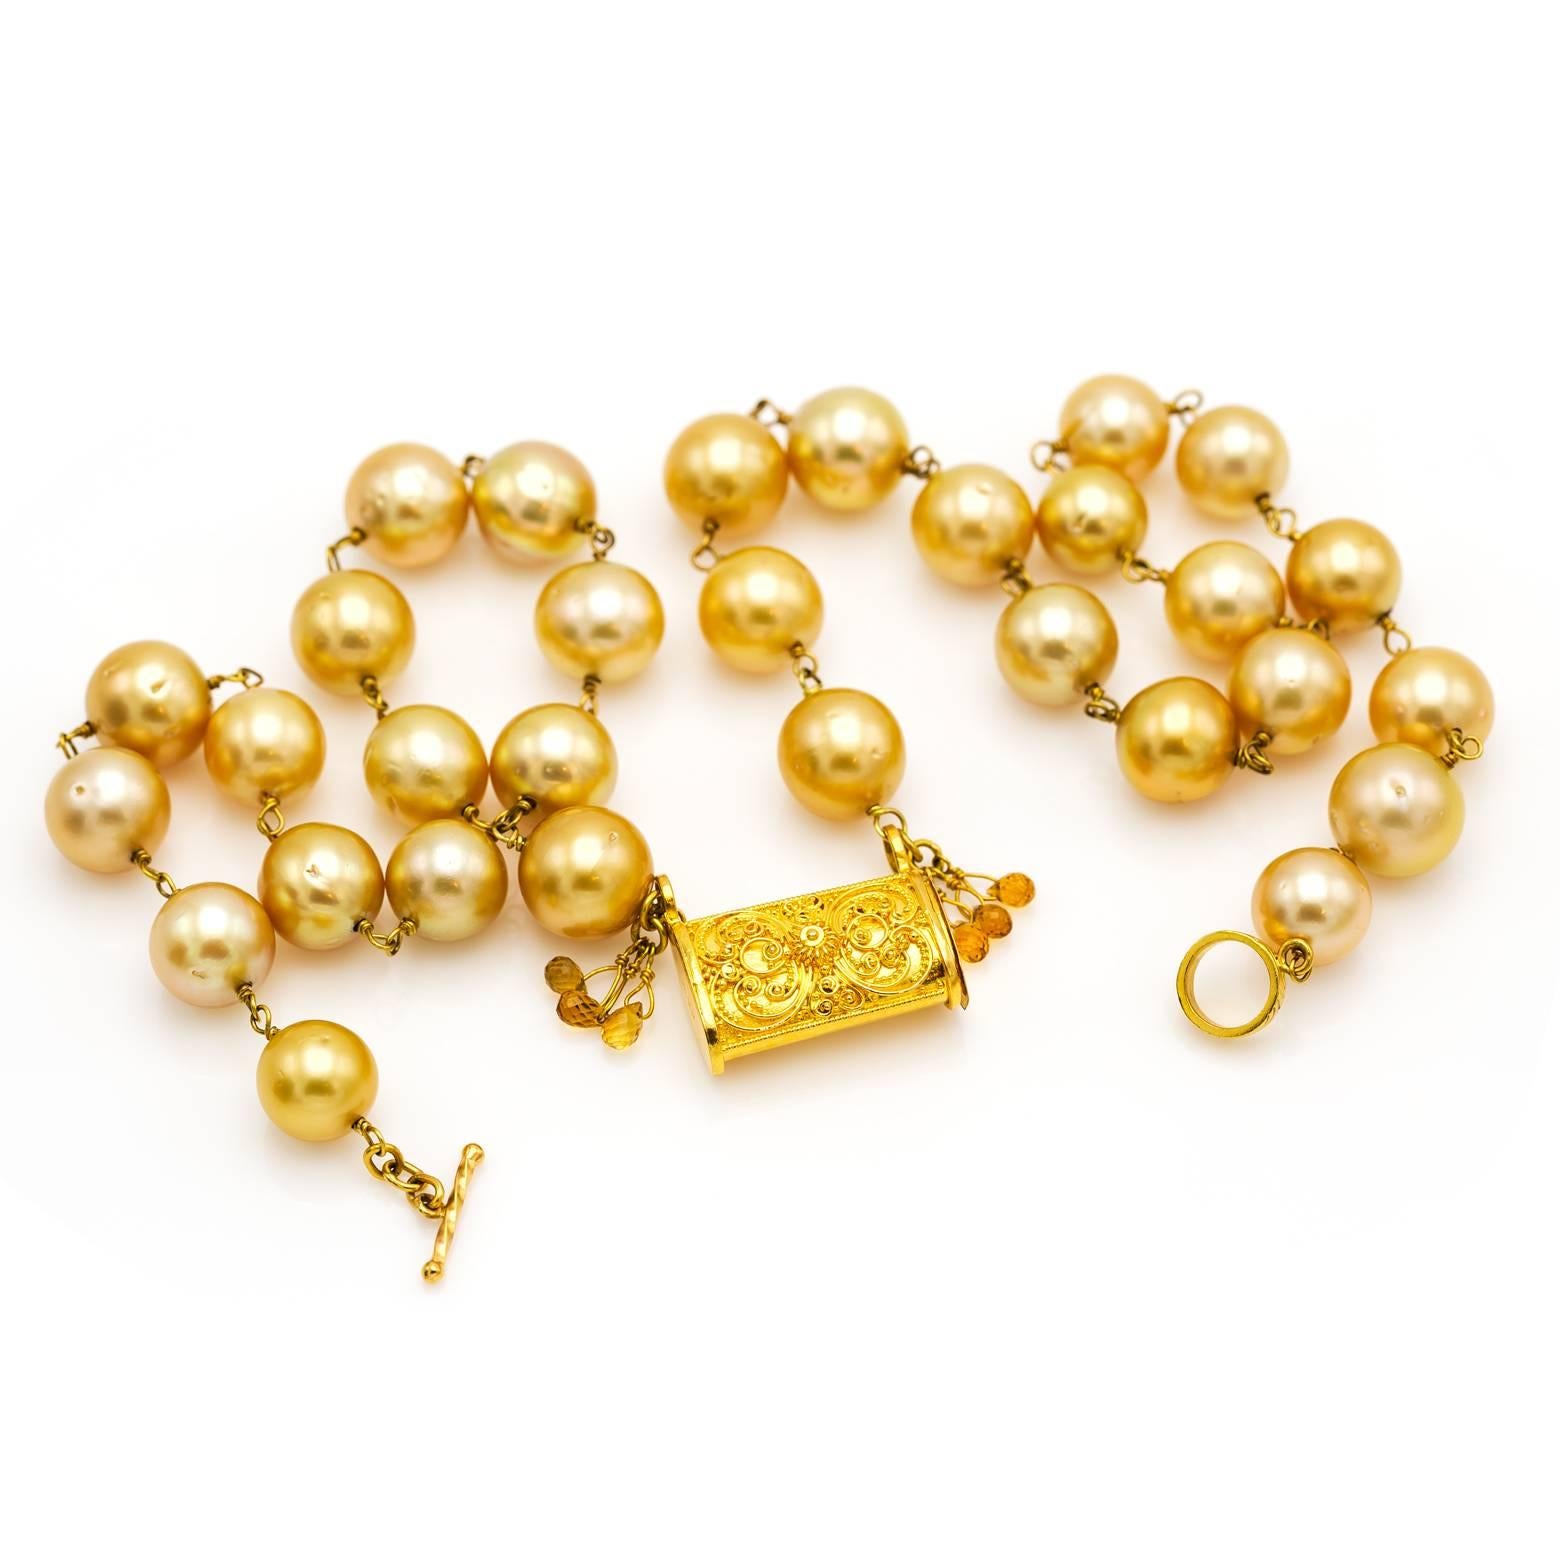 Women's Golden South Sea Pearl Necklace